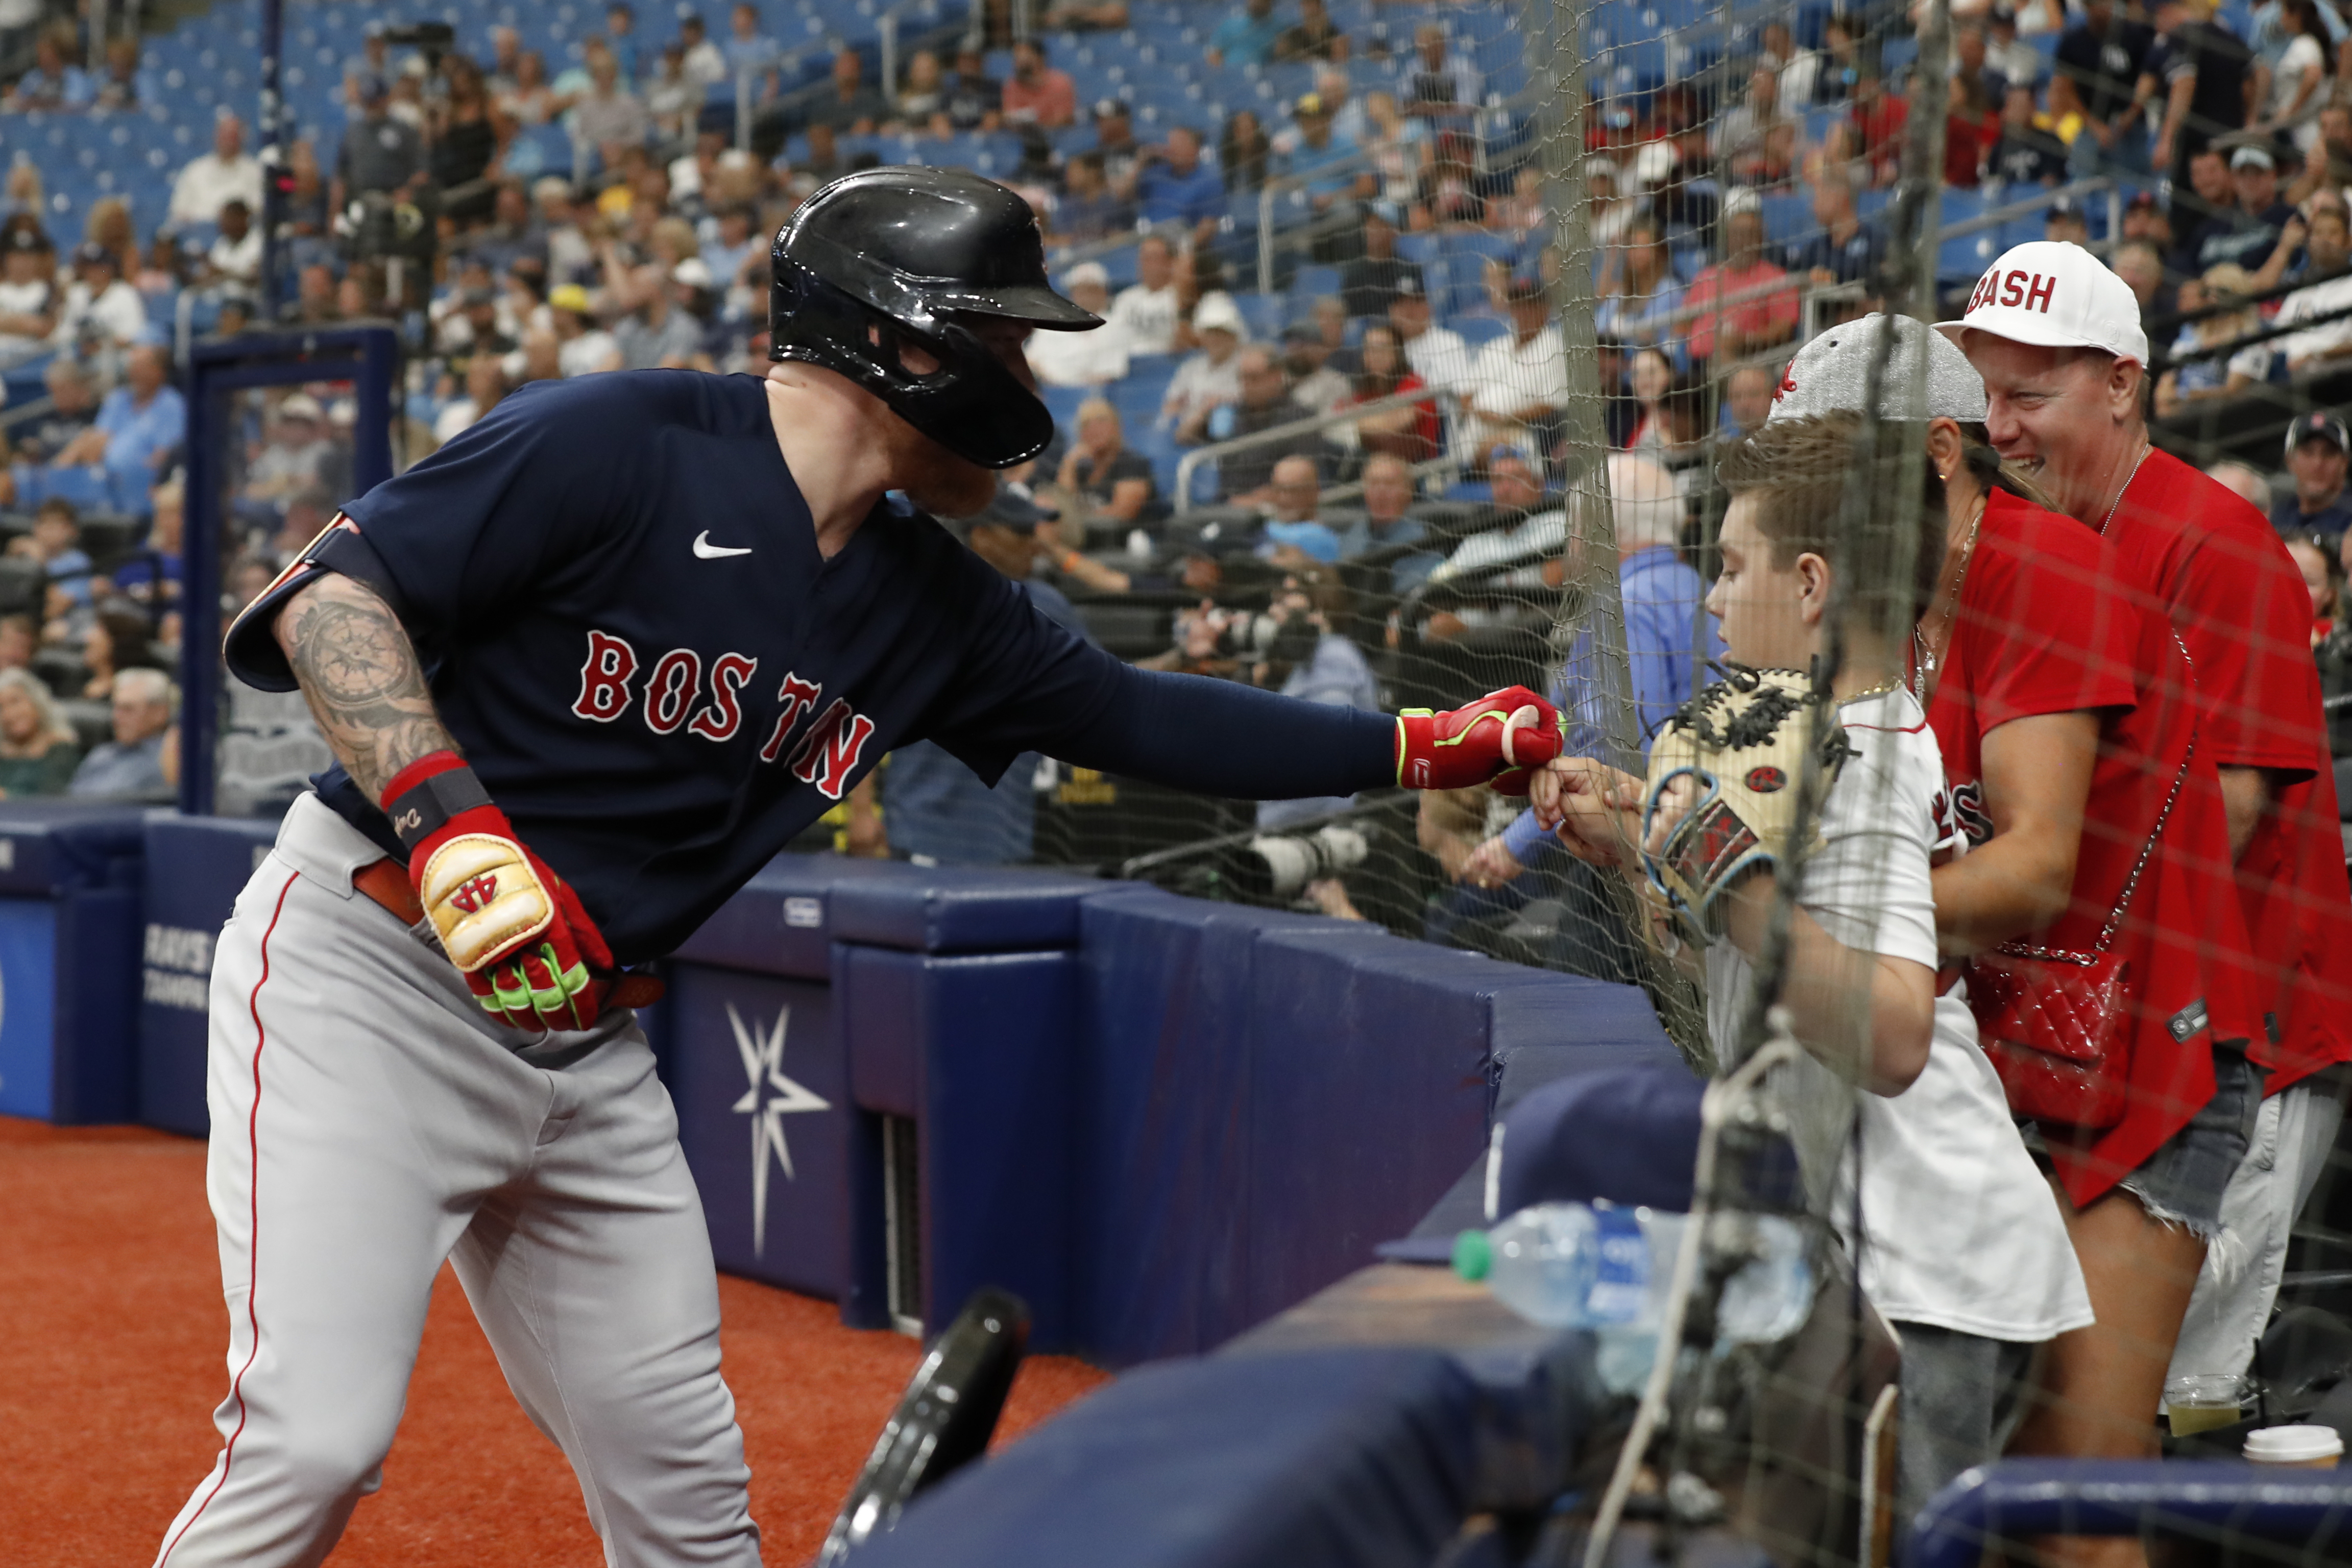 Trevor Story is eager to hit off the wall at Fenway Park, and other  observations from the Red Sox' first six games - The Boston Globe